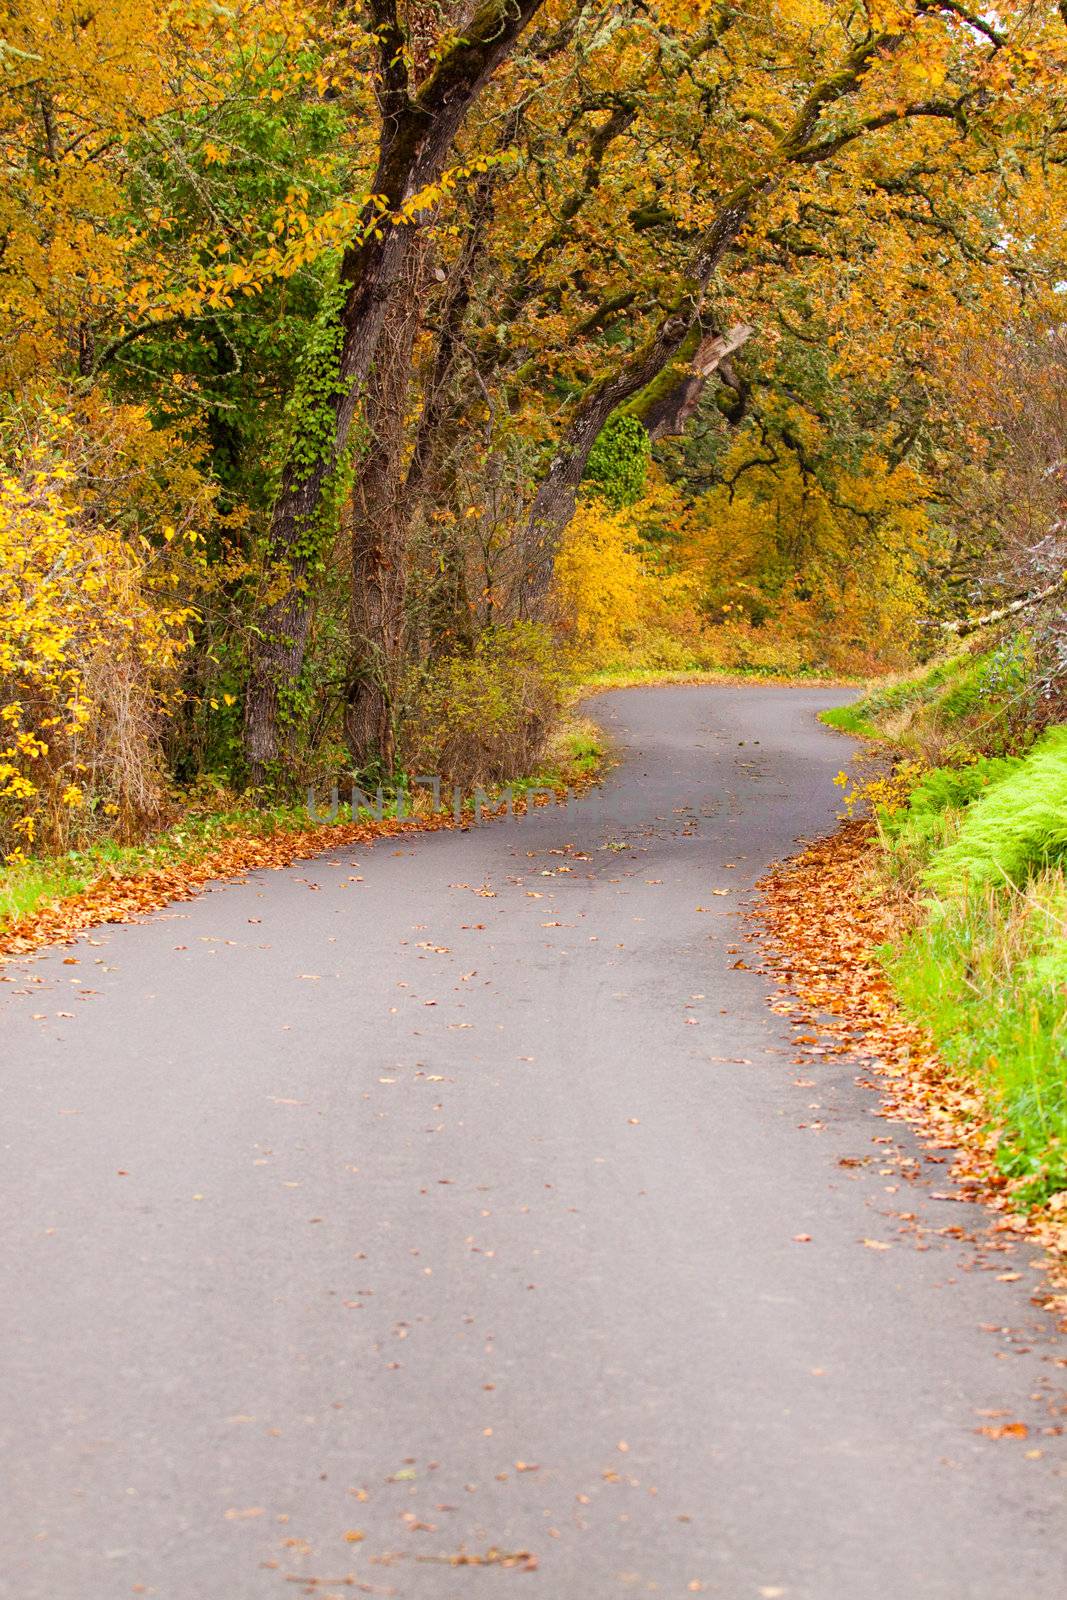 Leaves cover the ground along a curving road during the season of Autumn or Fall.